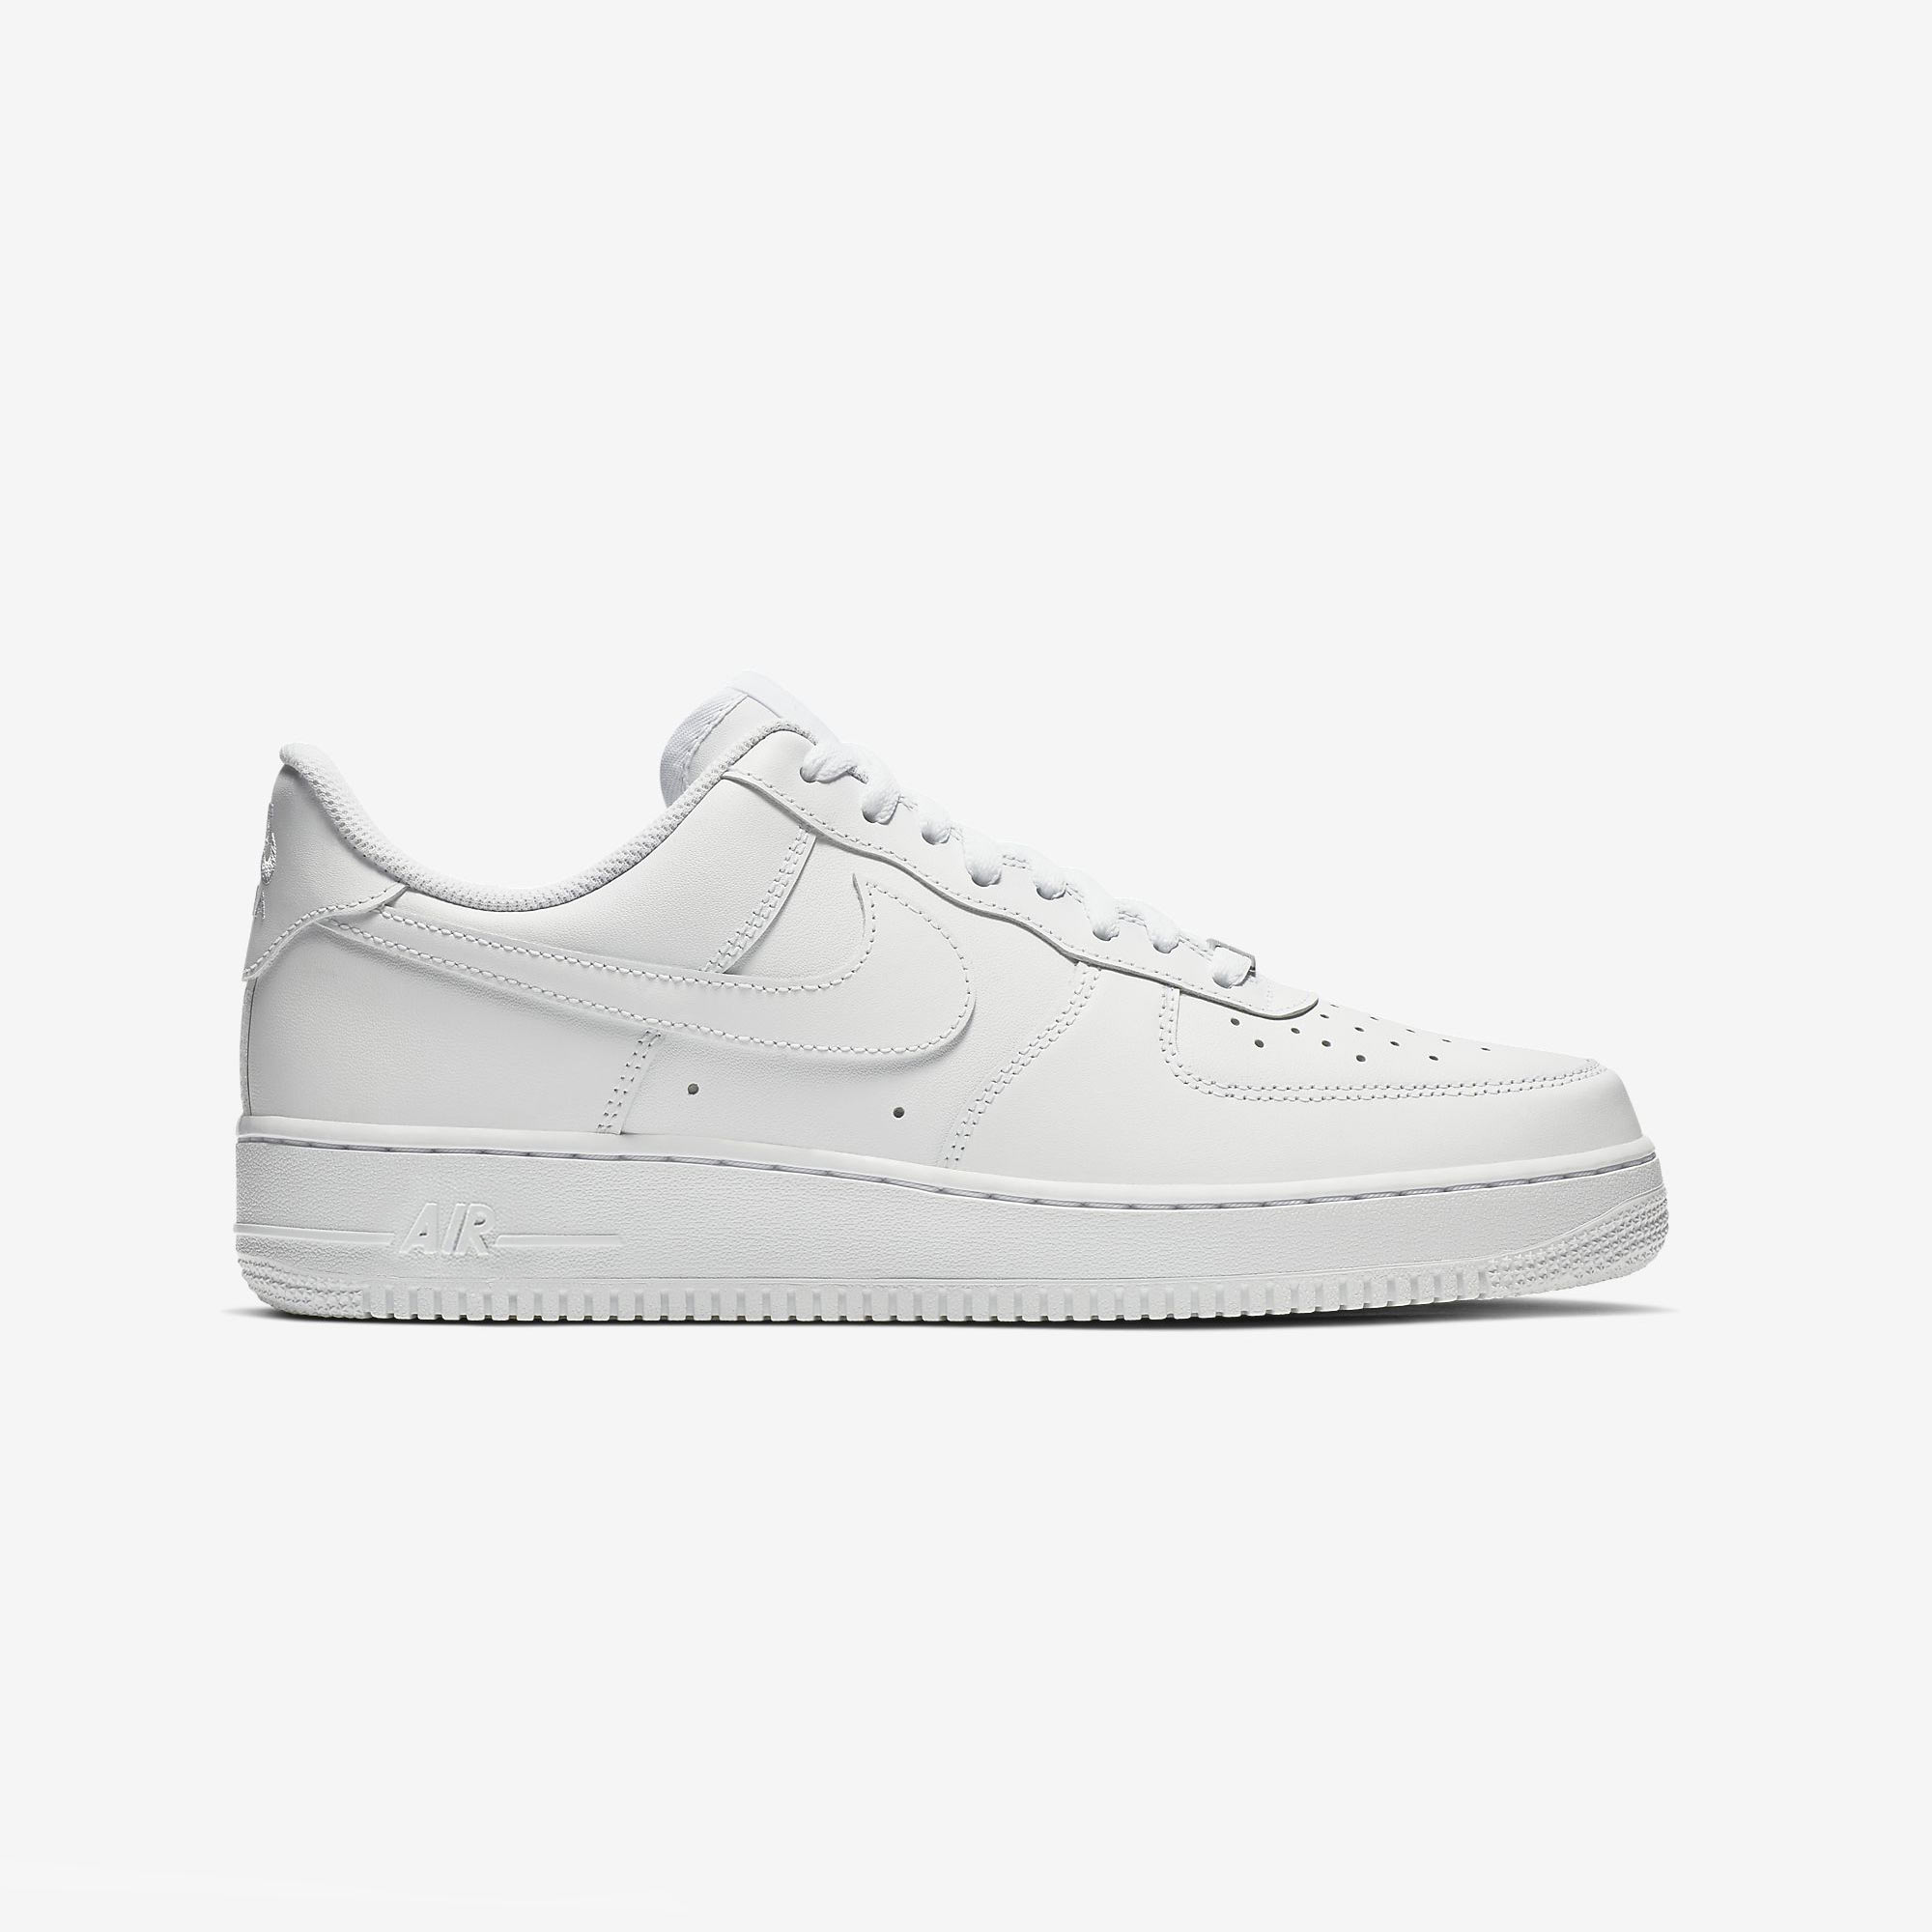 Nike Air Force 1 '07 white/white – Sneakers on Mars